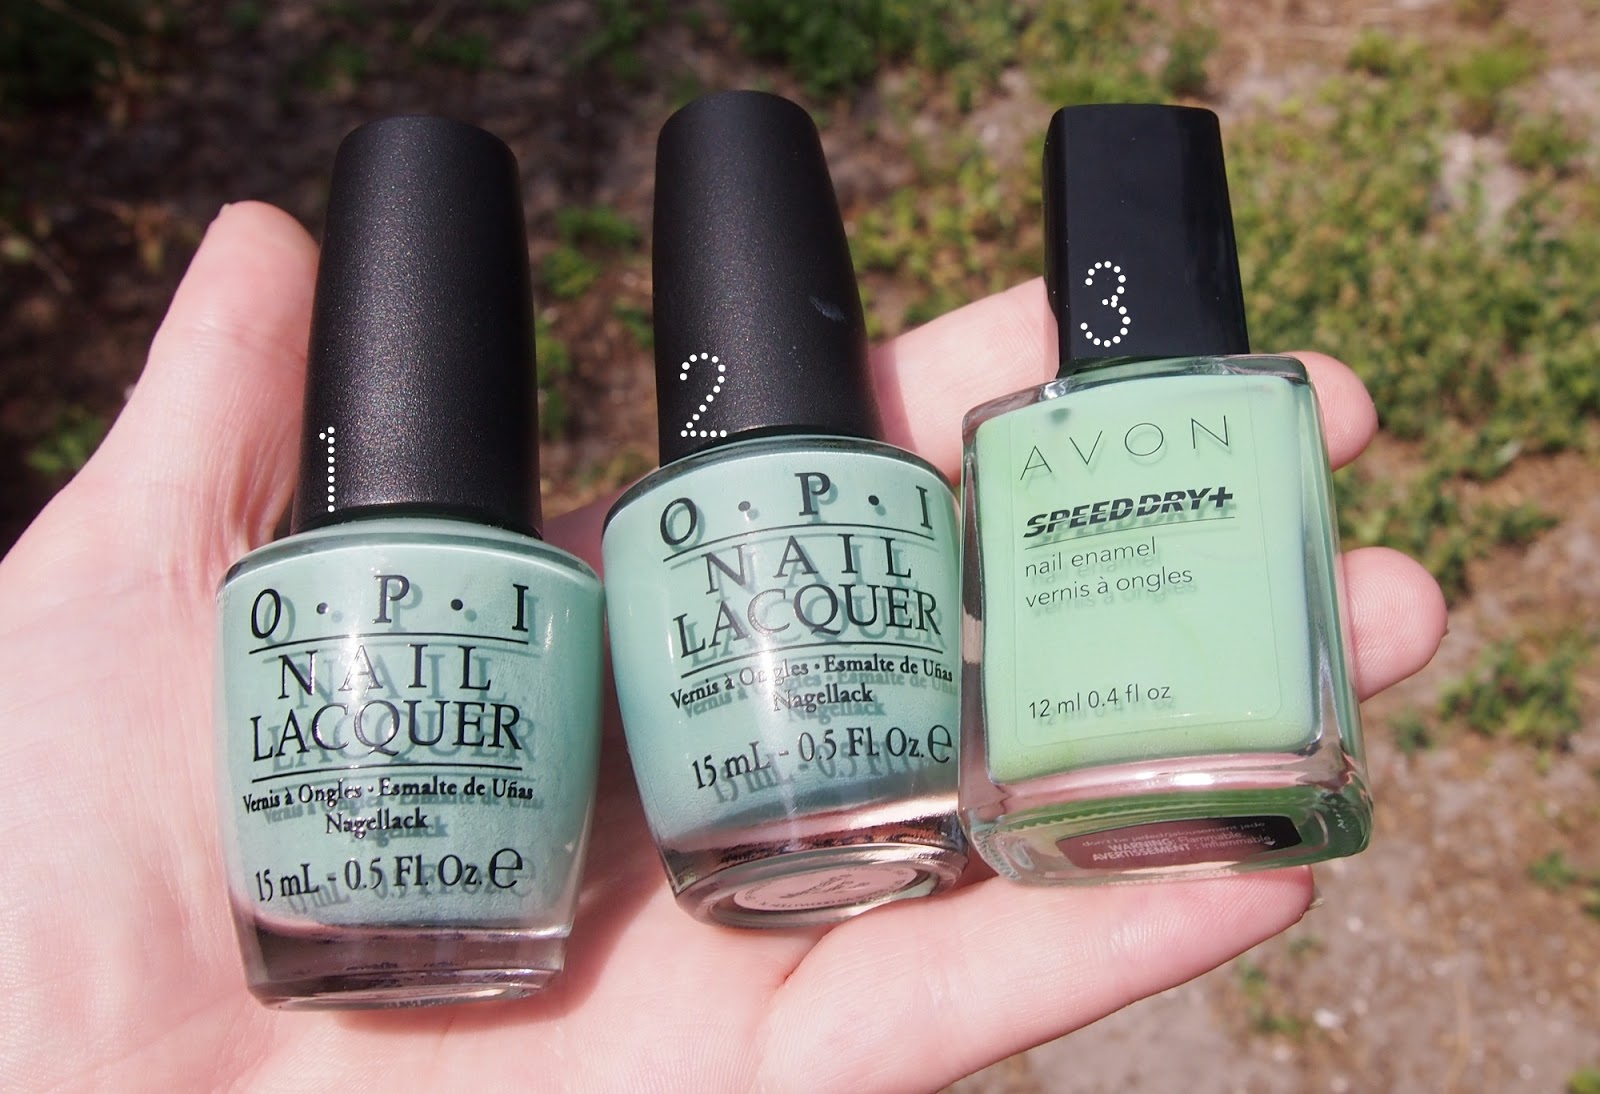 3. OPI Nail Lacquer in "Mermaid's Tears" - wide 7